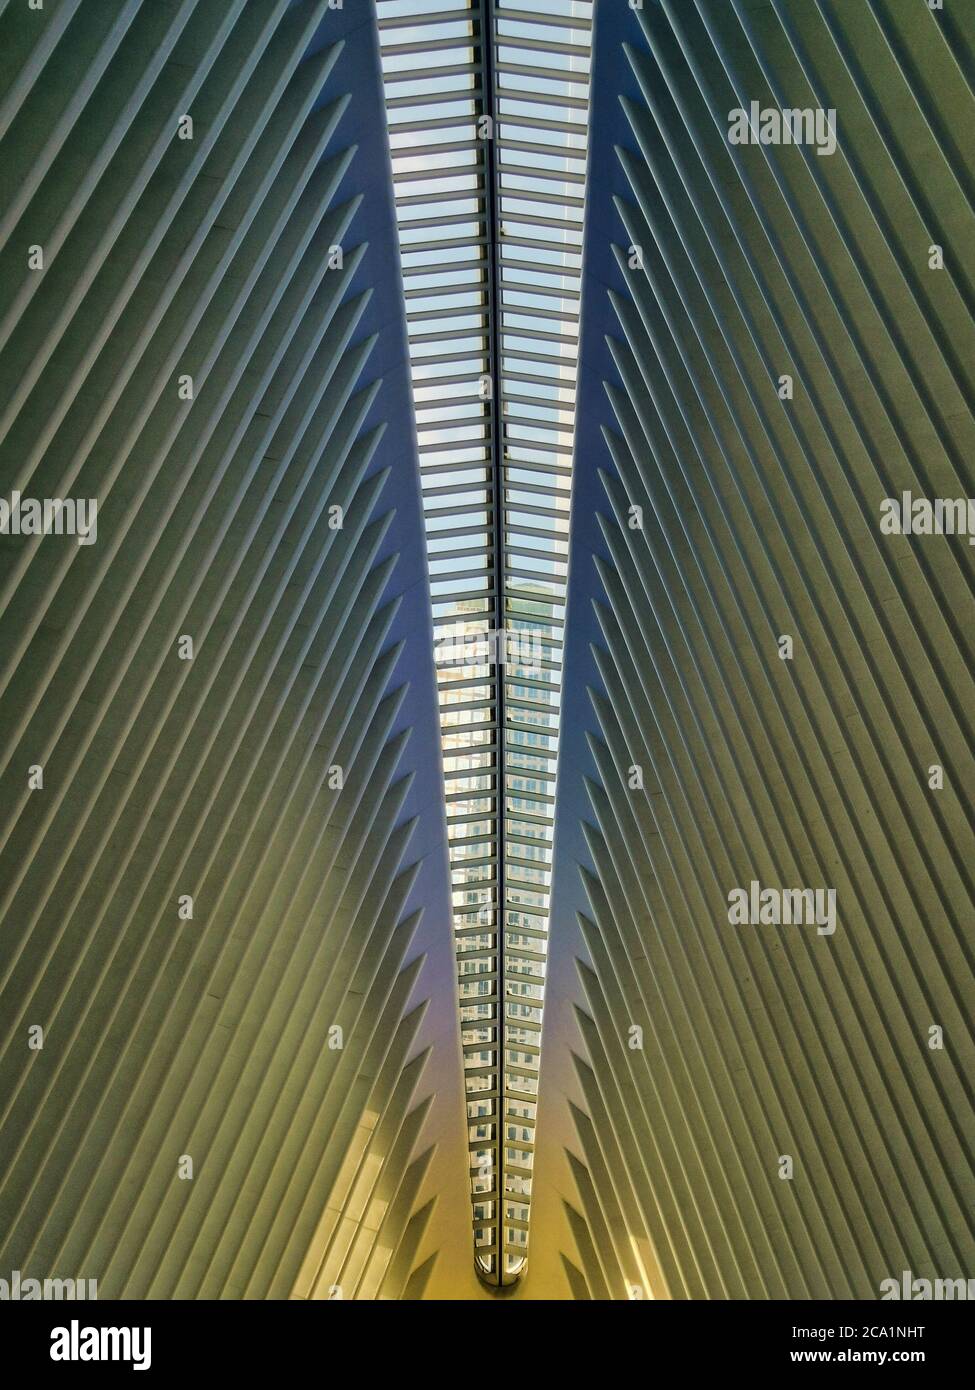 Transportation Hub (Oculus)  in New York city in Financial District interior view showing  the main hall (designed by Santiago Calatrava architect ) Stock Photo